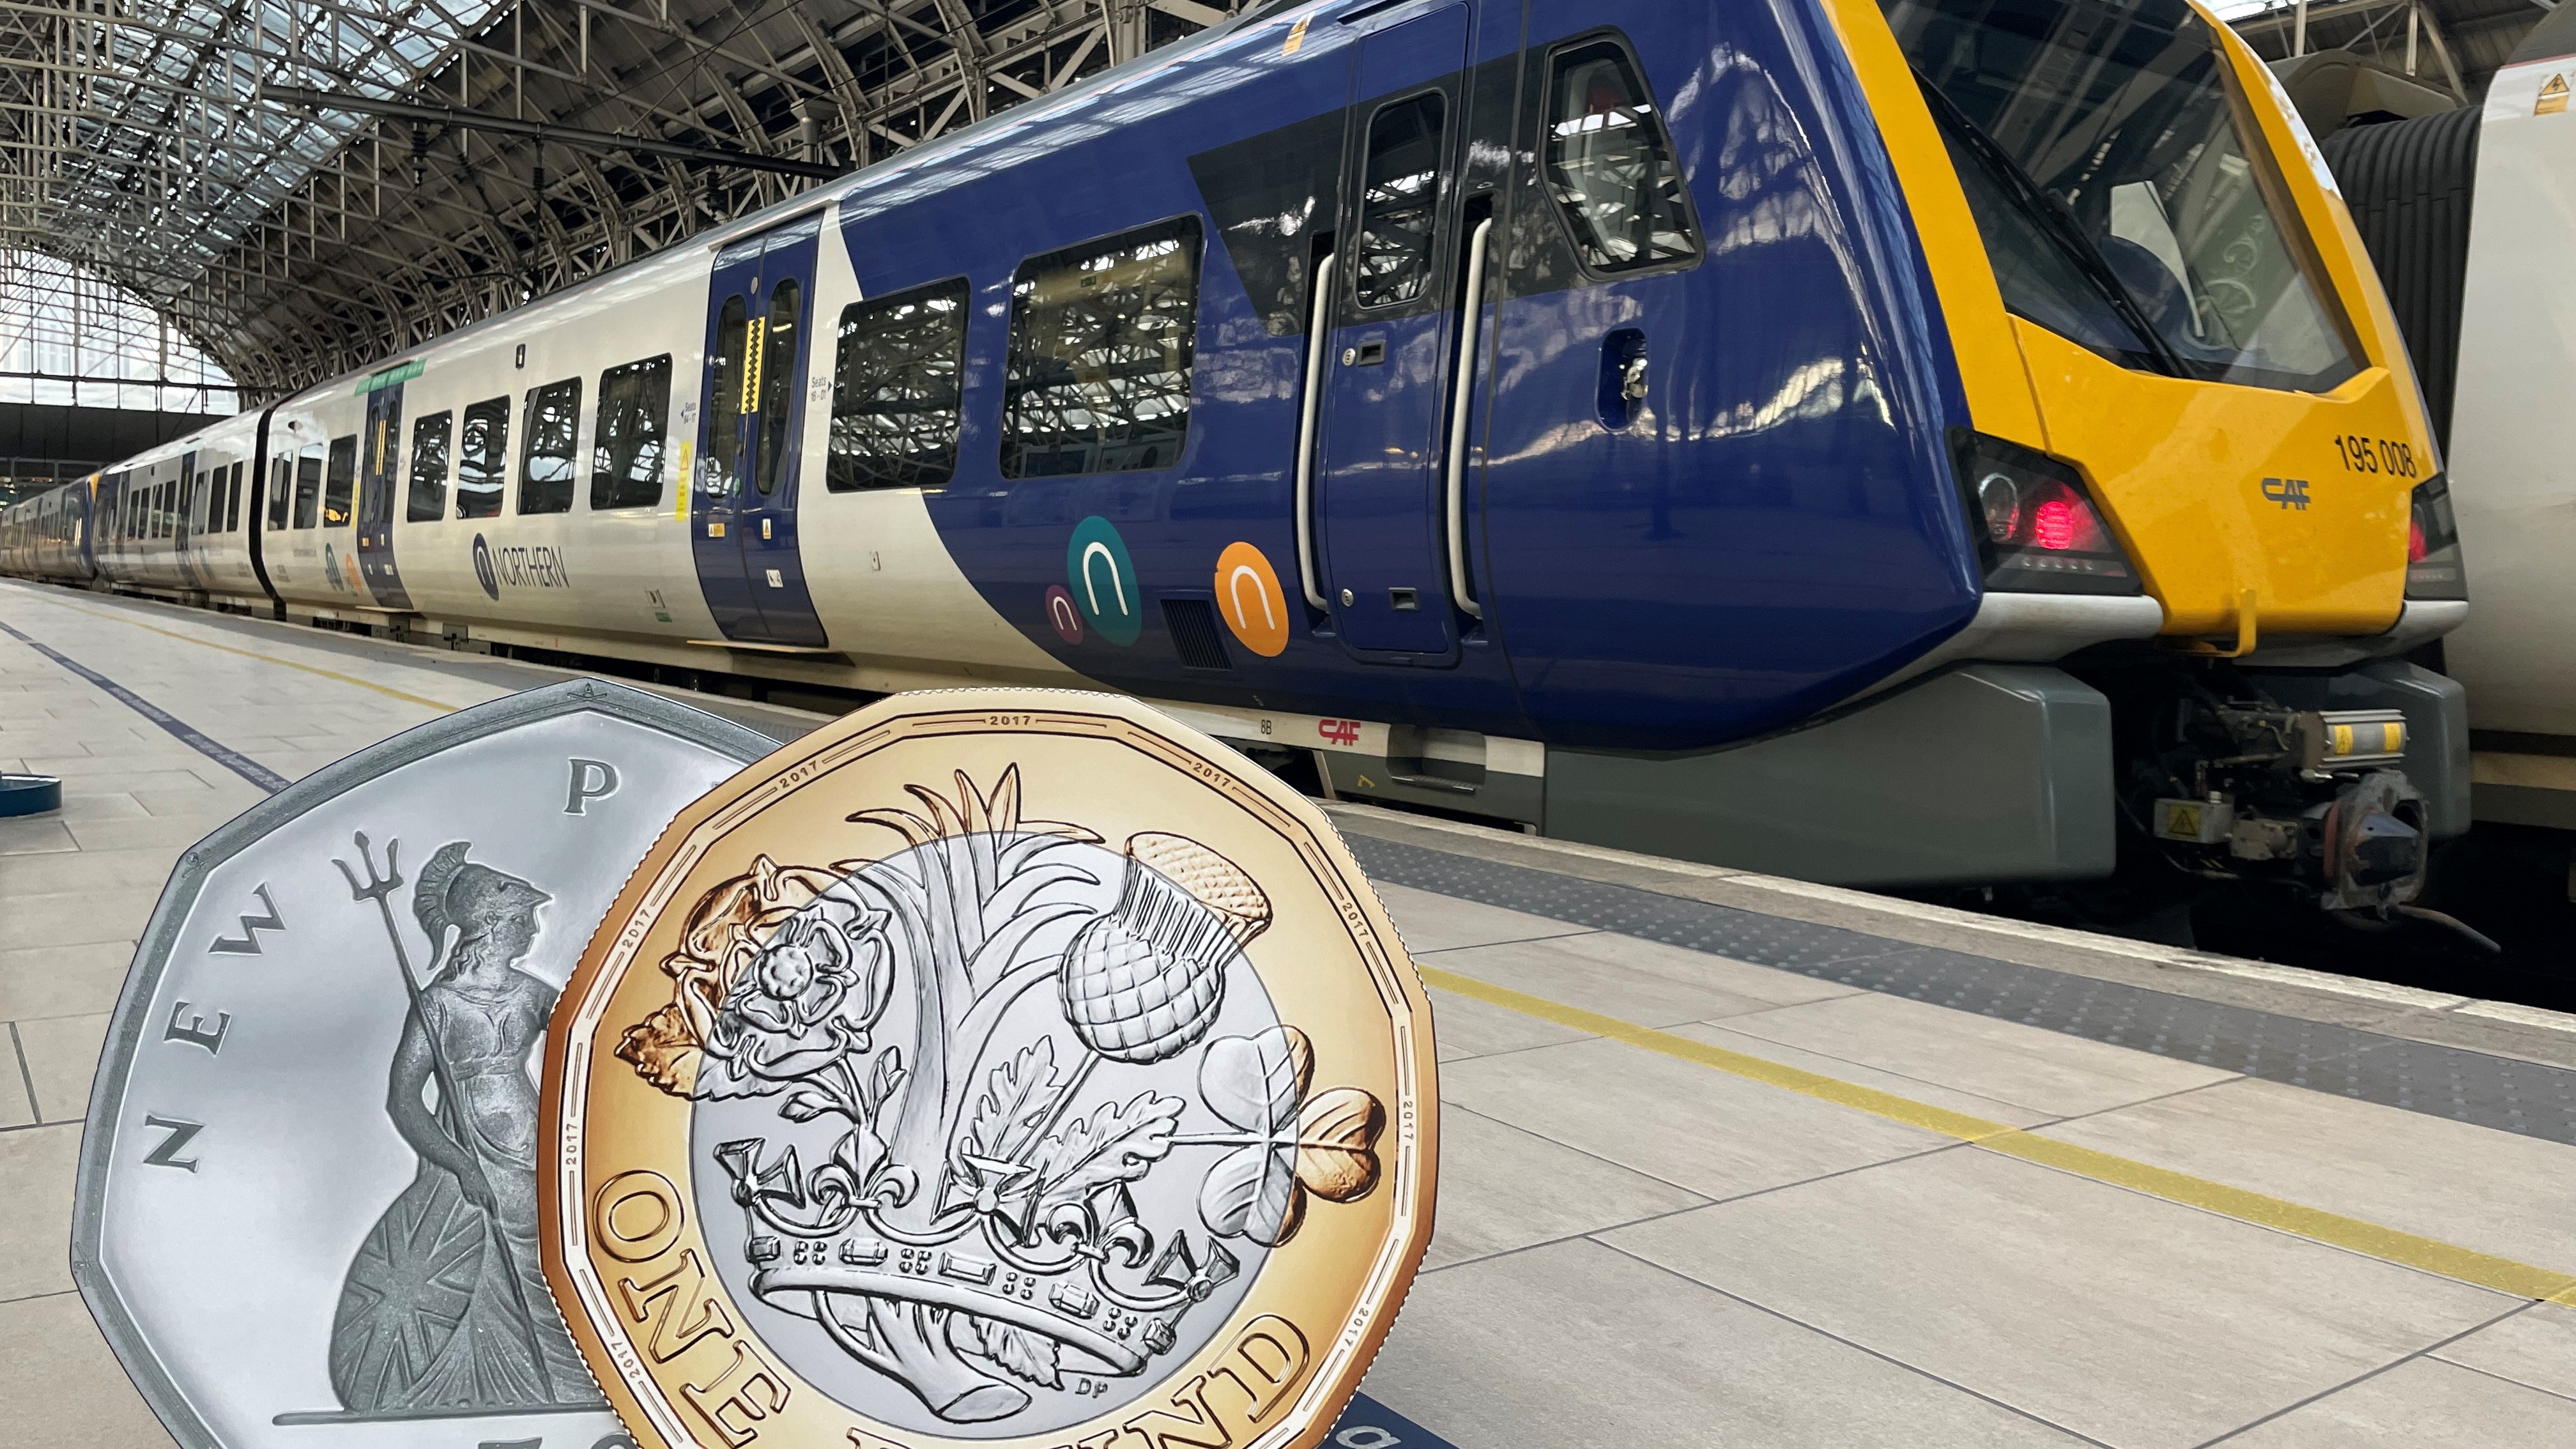 Image shows 50p & £1 coin as part of Northern Flash Sale - January 2023